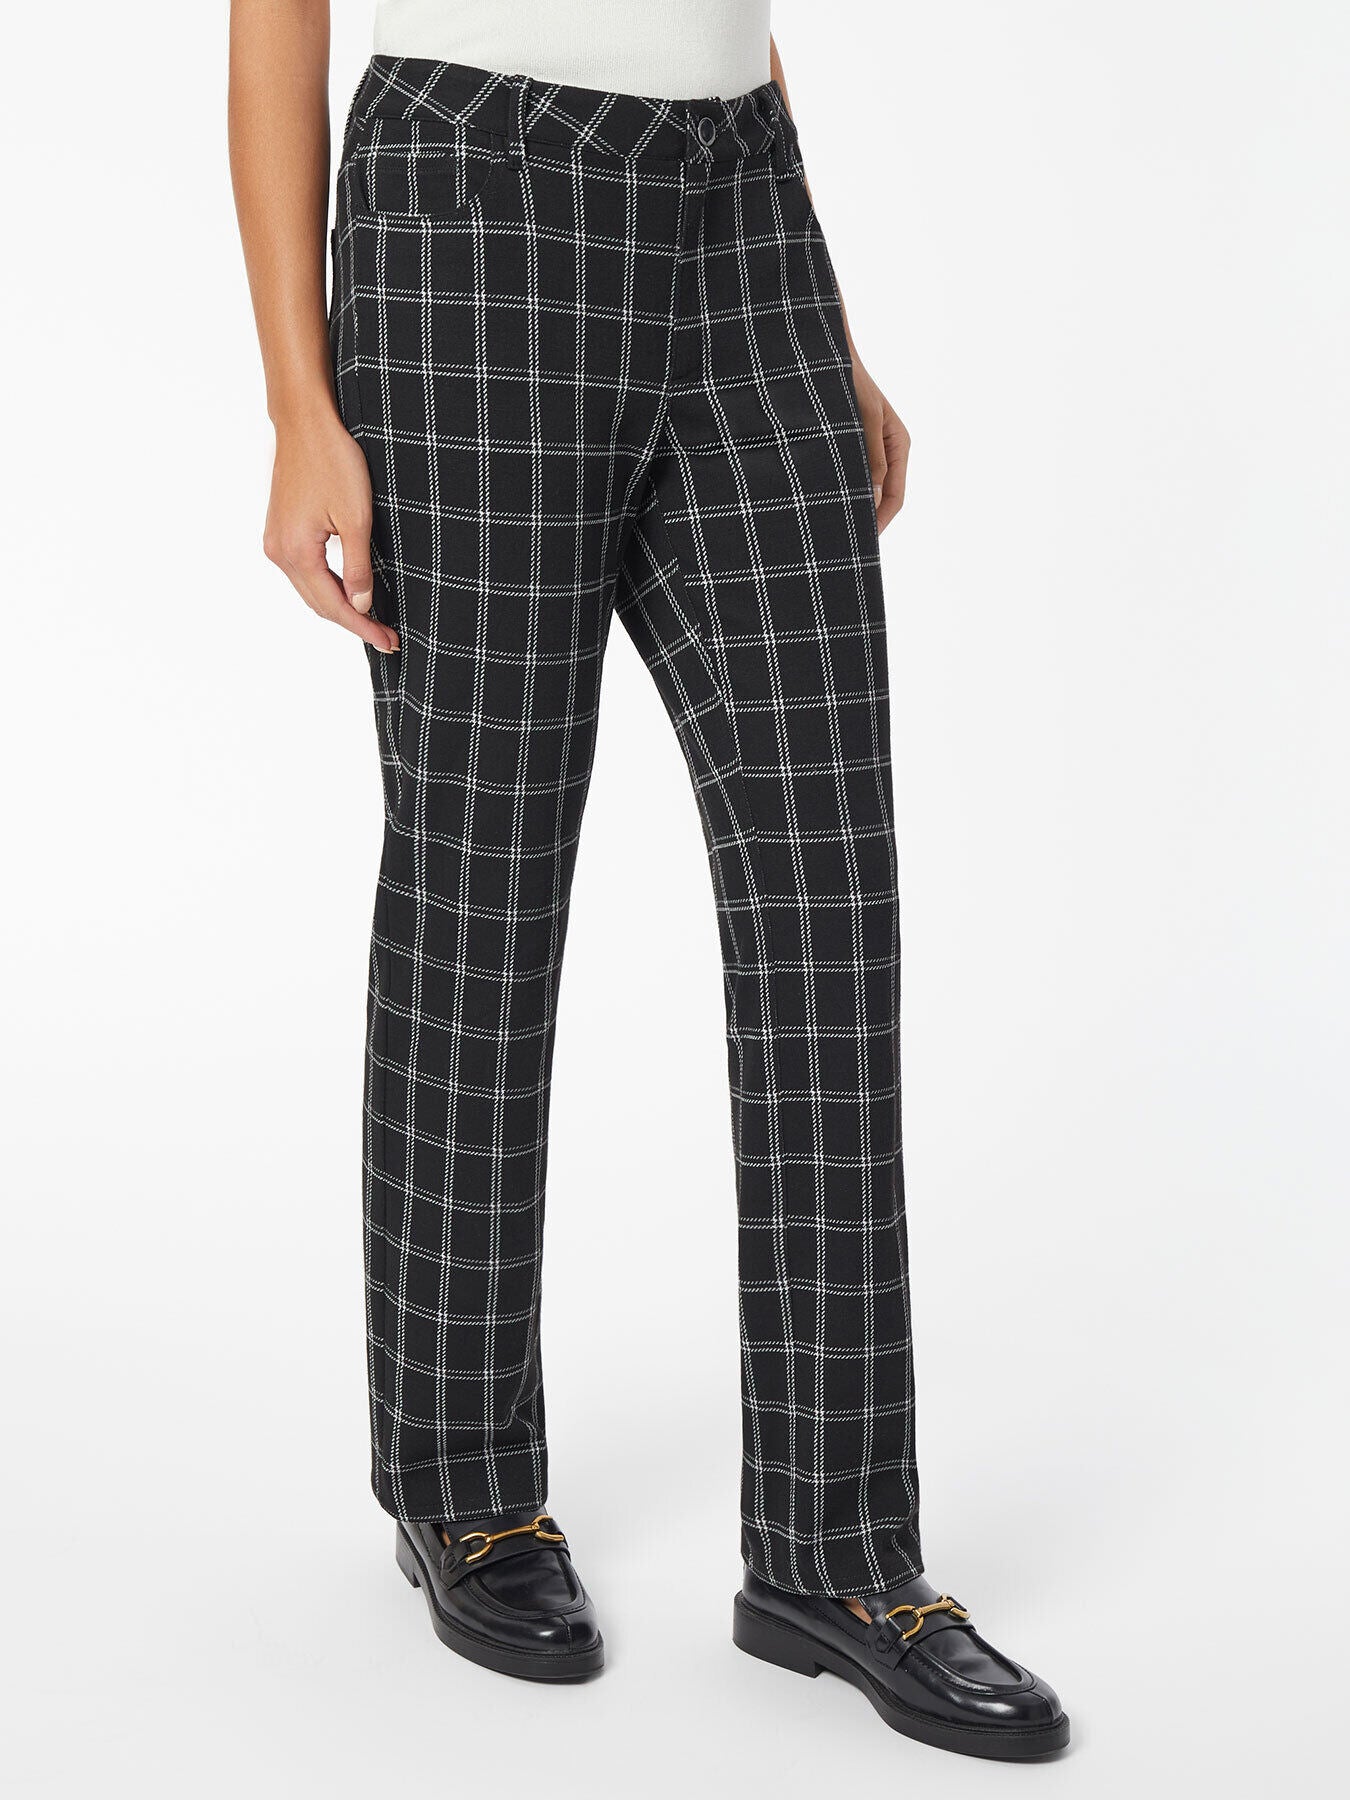 Father Sons Slim Formal Black and Ecru Large Check Stretch Trousers -